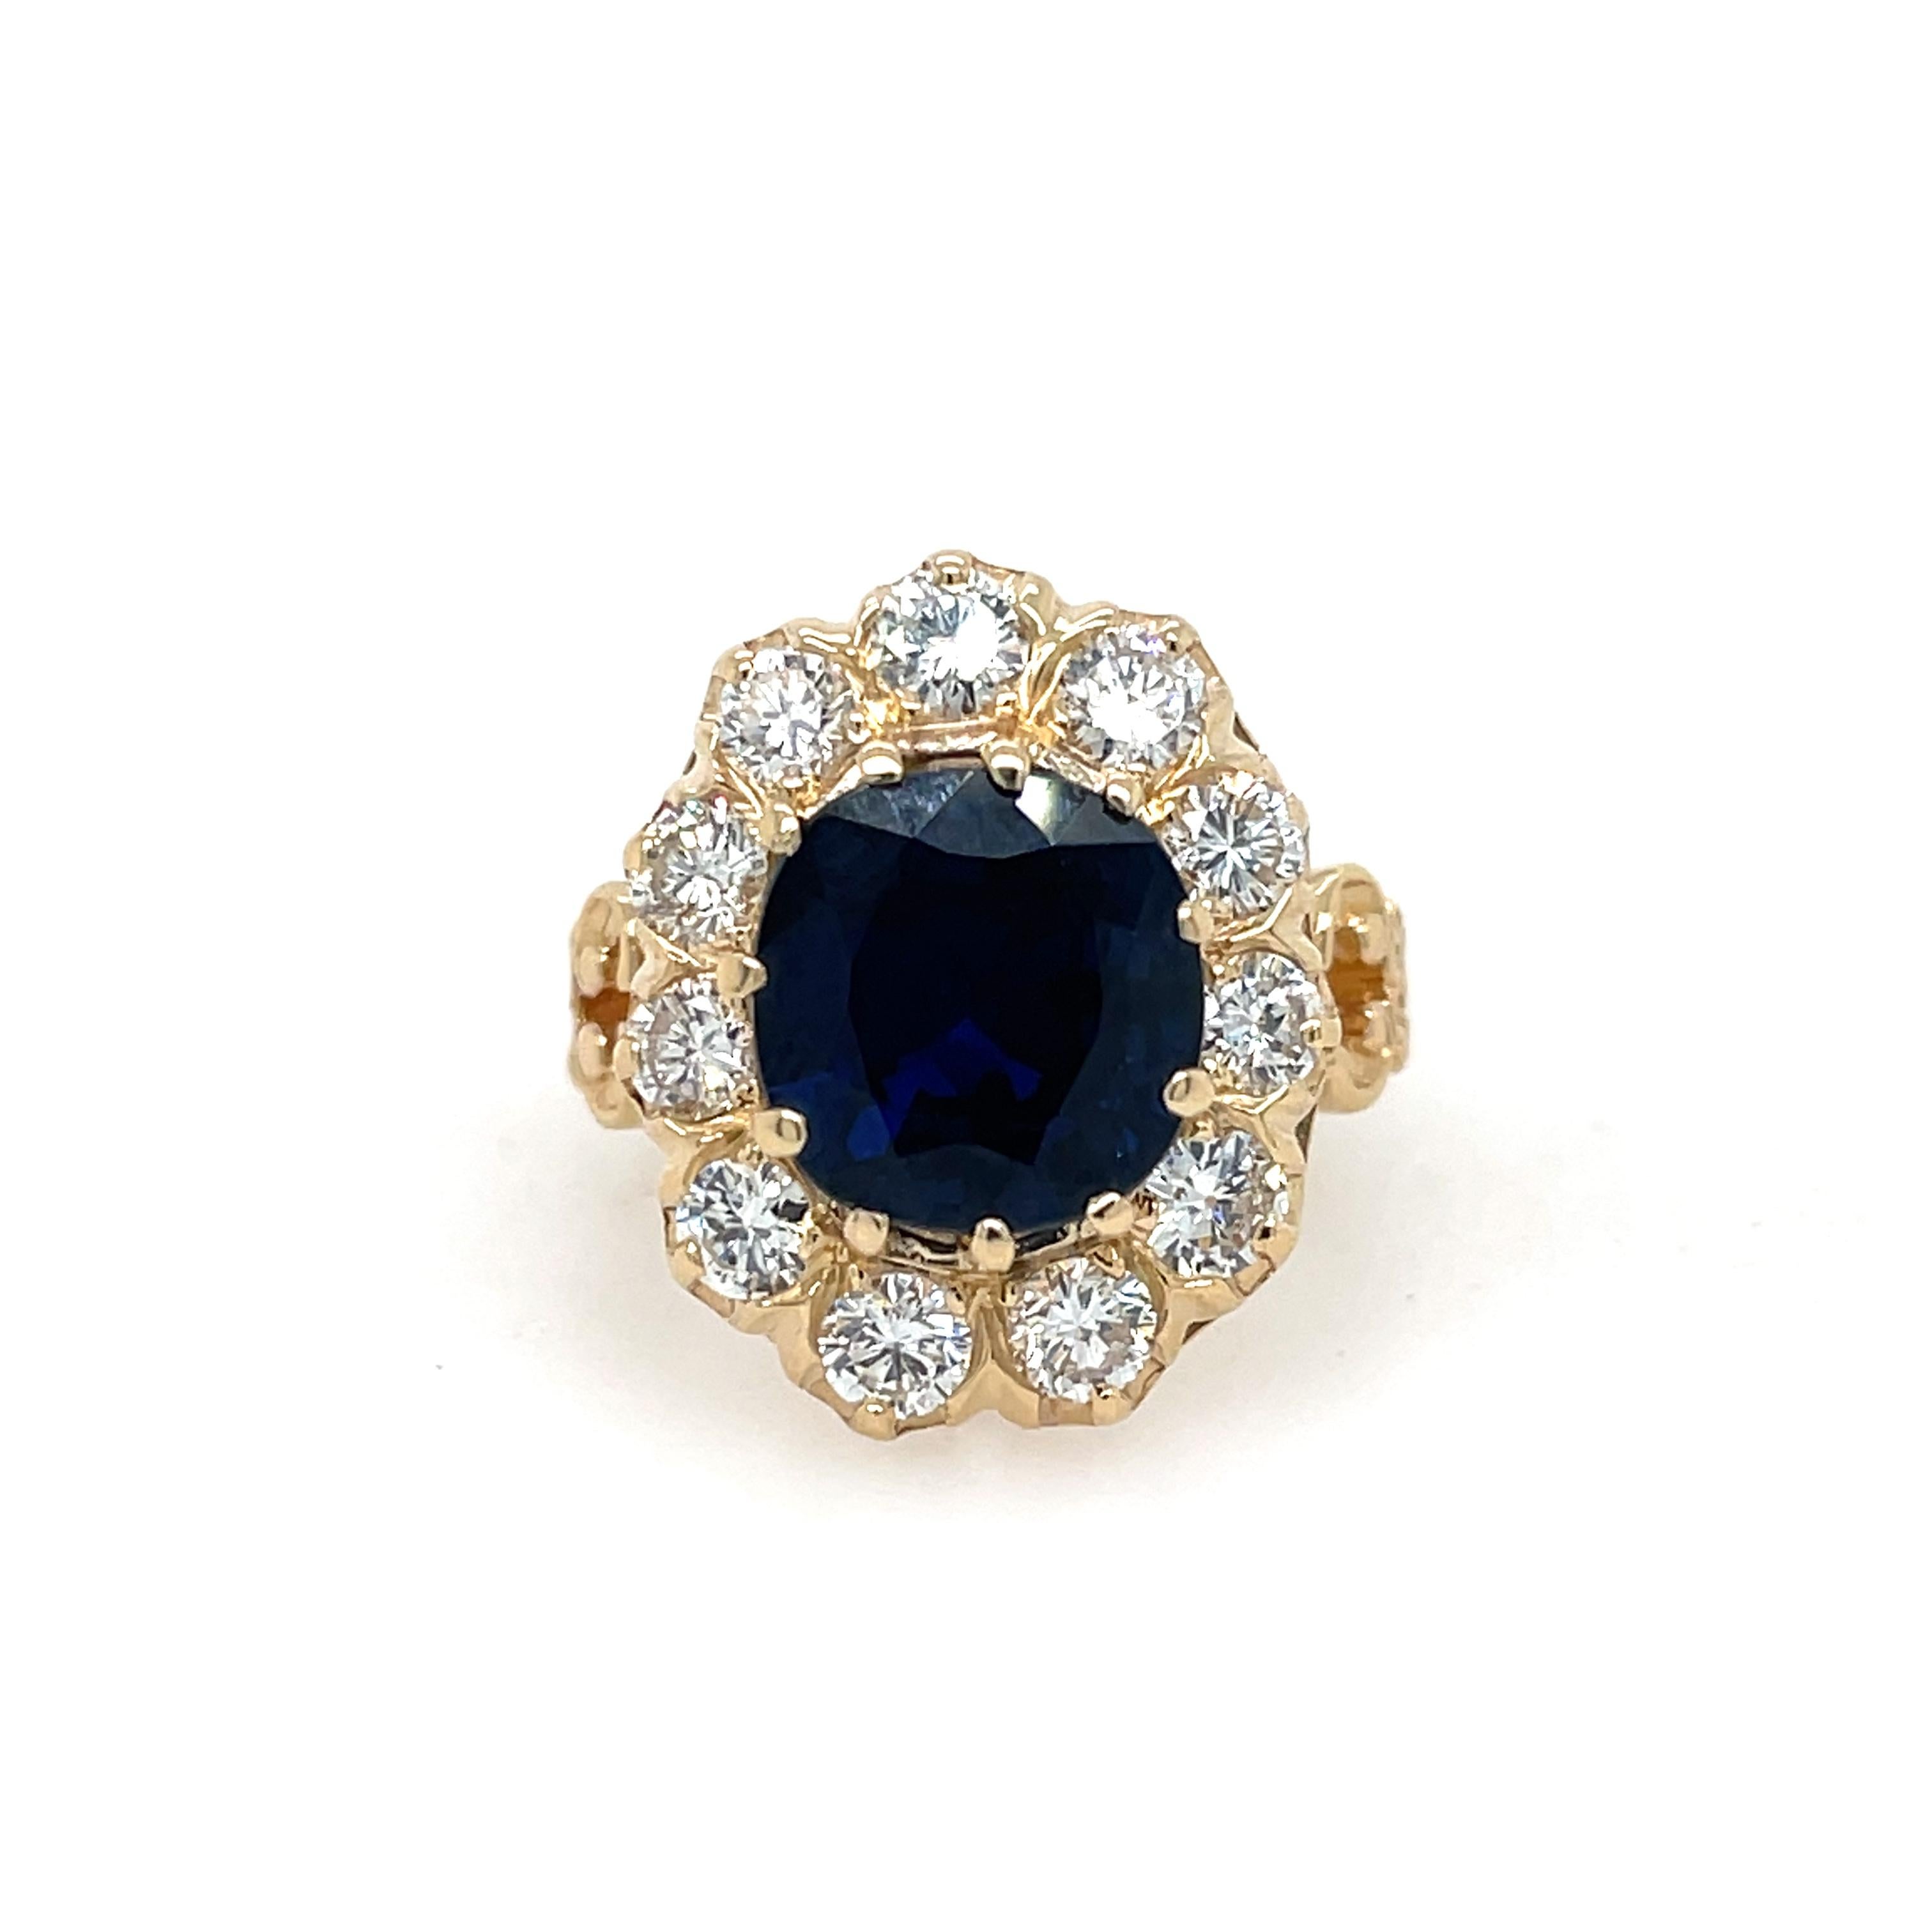 Cushion Sapphire and Diamond Ring in 18K Yellow Gold. This ring features a Cushion Cut 3.96ct Blue Sapphire (GIA Certified) as the center stone, accented by a halo of 11 round cut diamonds. Size 6.25
9.2 Grams